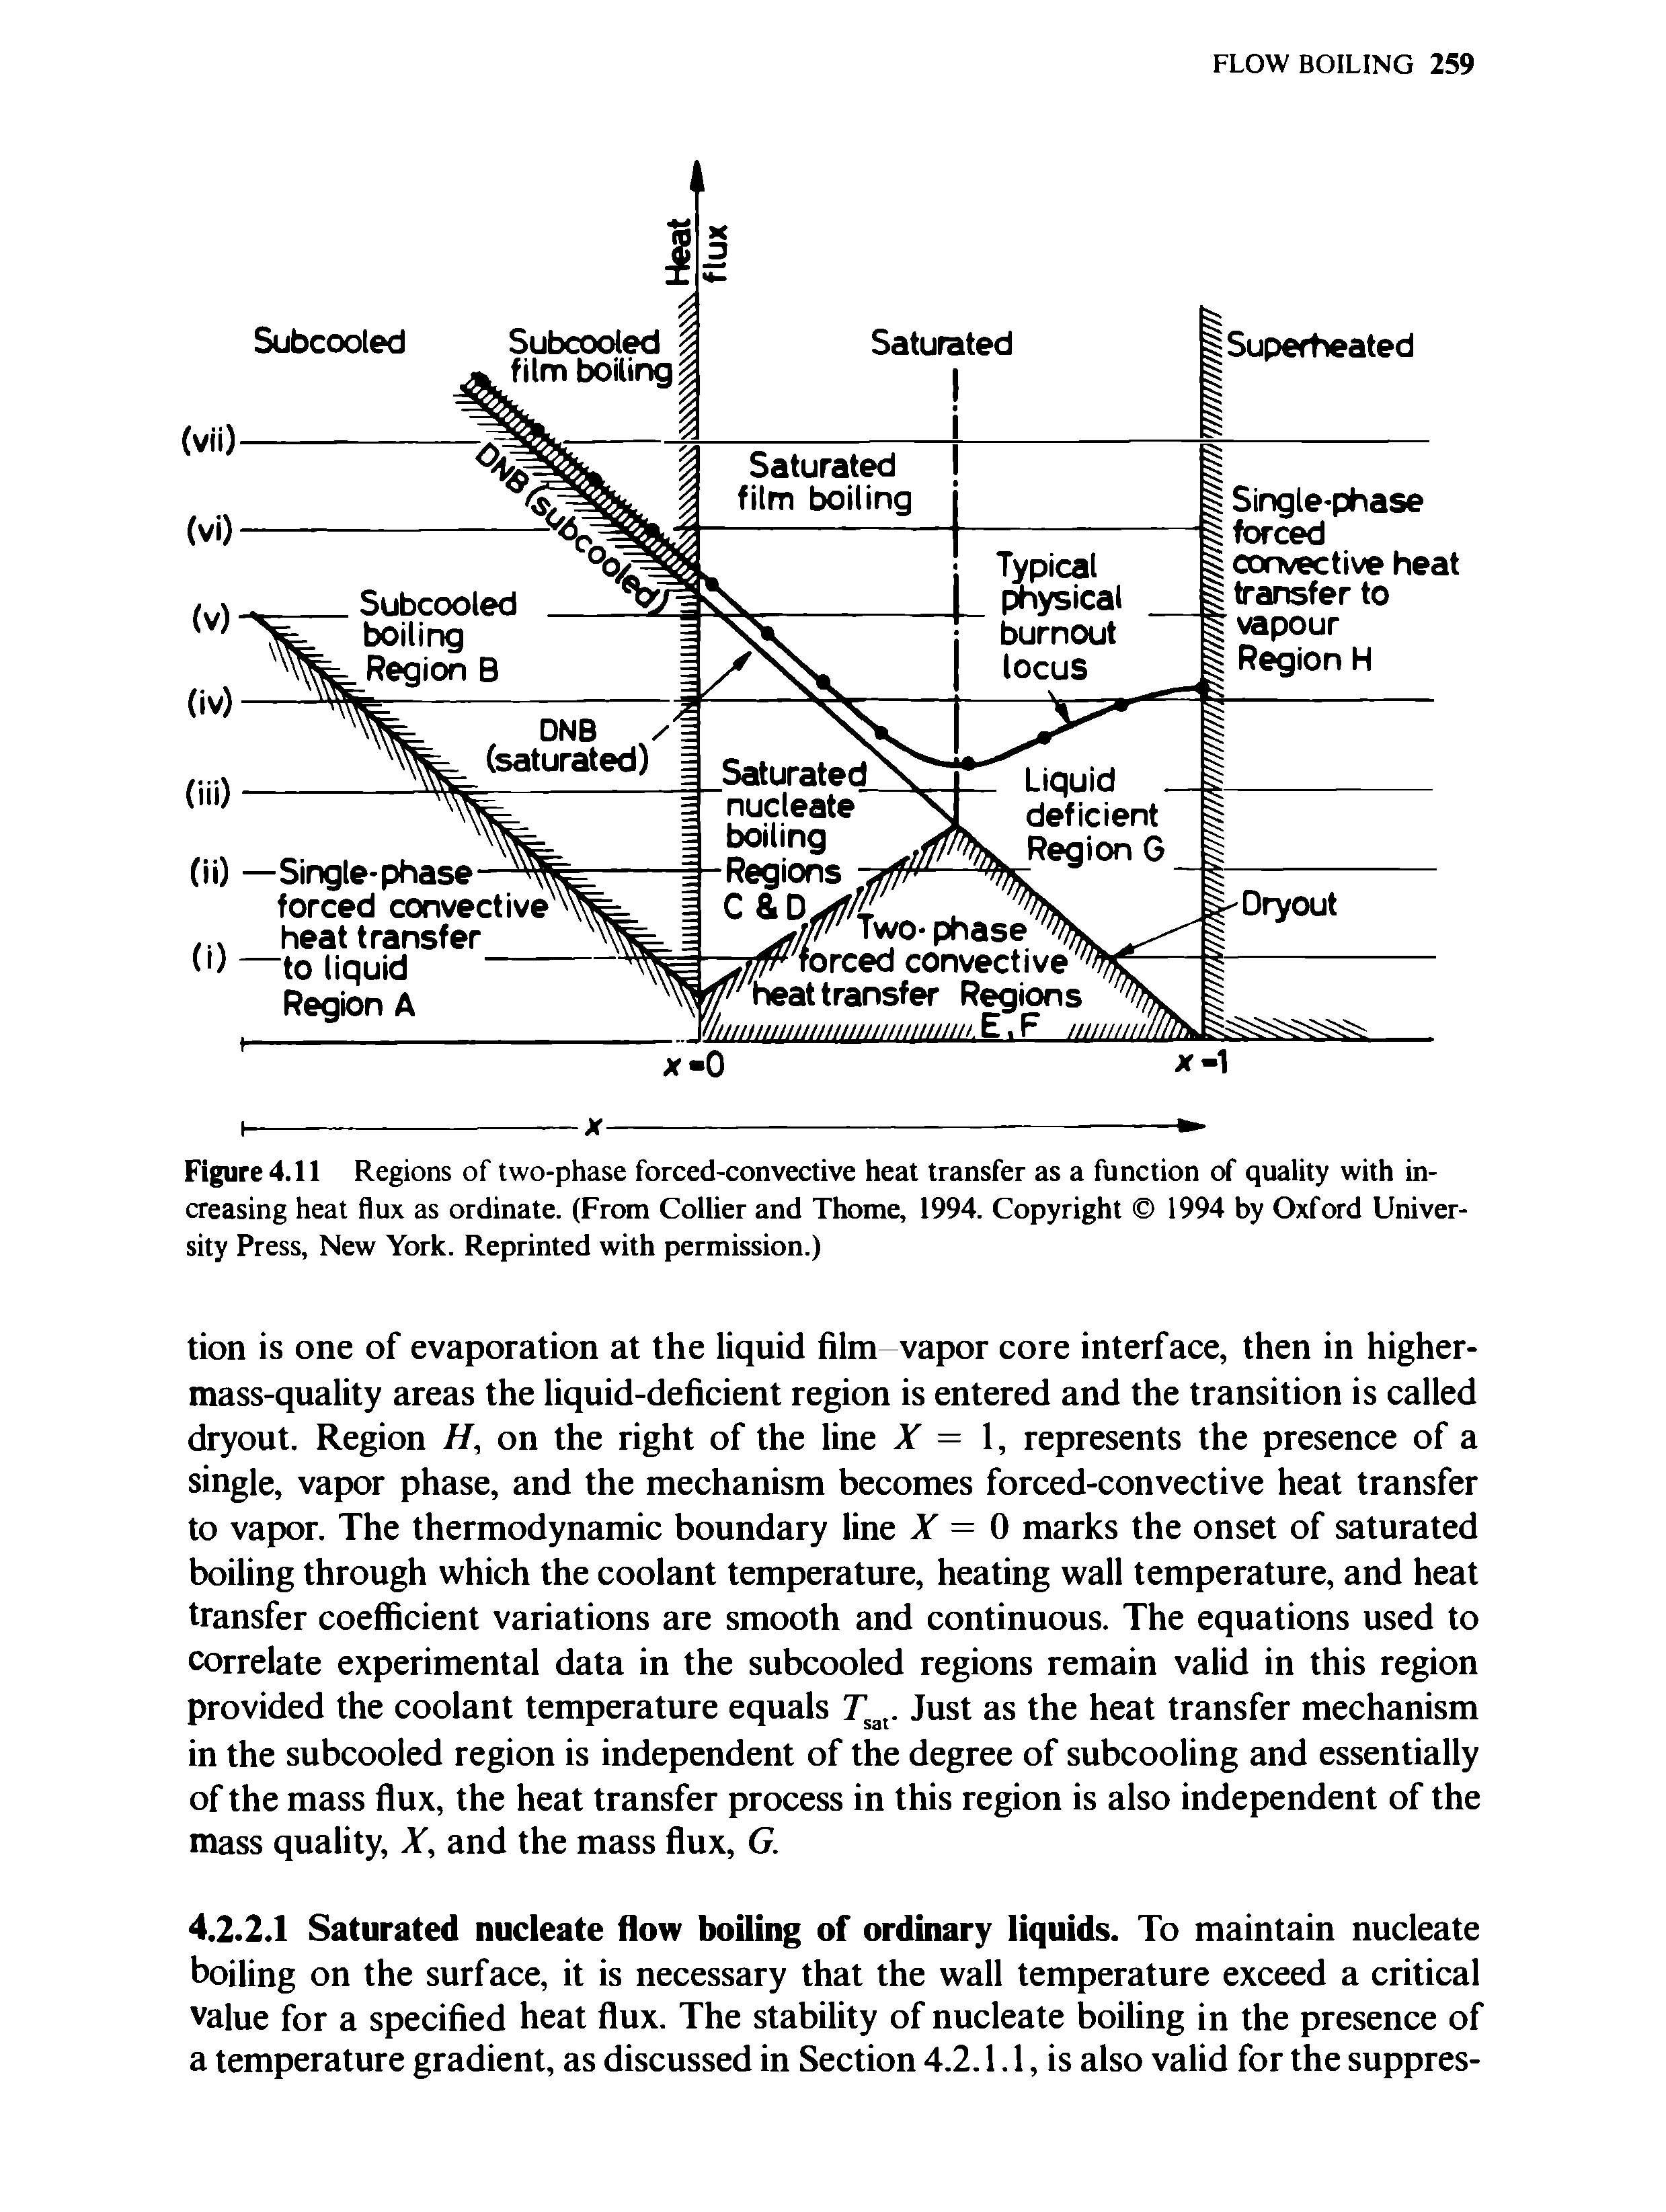 Figure 4.11 Regions of two-phase forced-convective heat transfer as a function of quality with increasing heat flux as ordinate. (From Collier and Thome, 1994. Copyright 1994 by Oxford University Press, New York. Reprinted with permission.)...